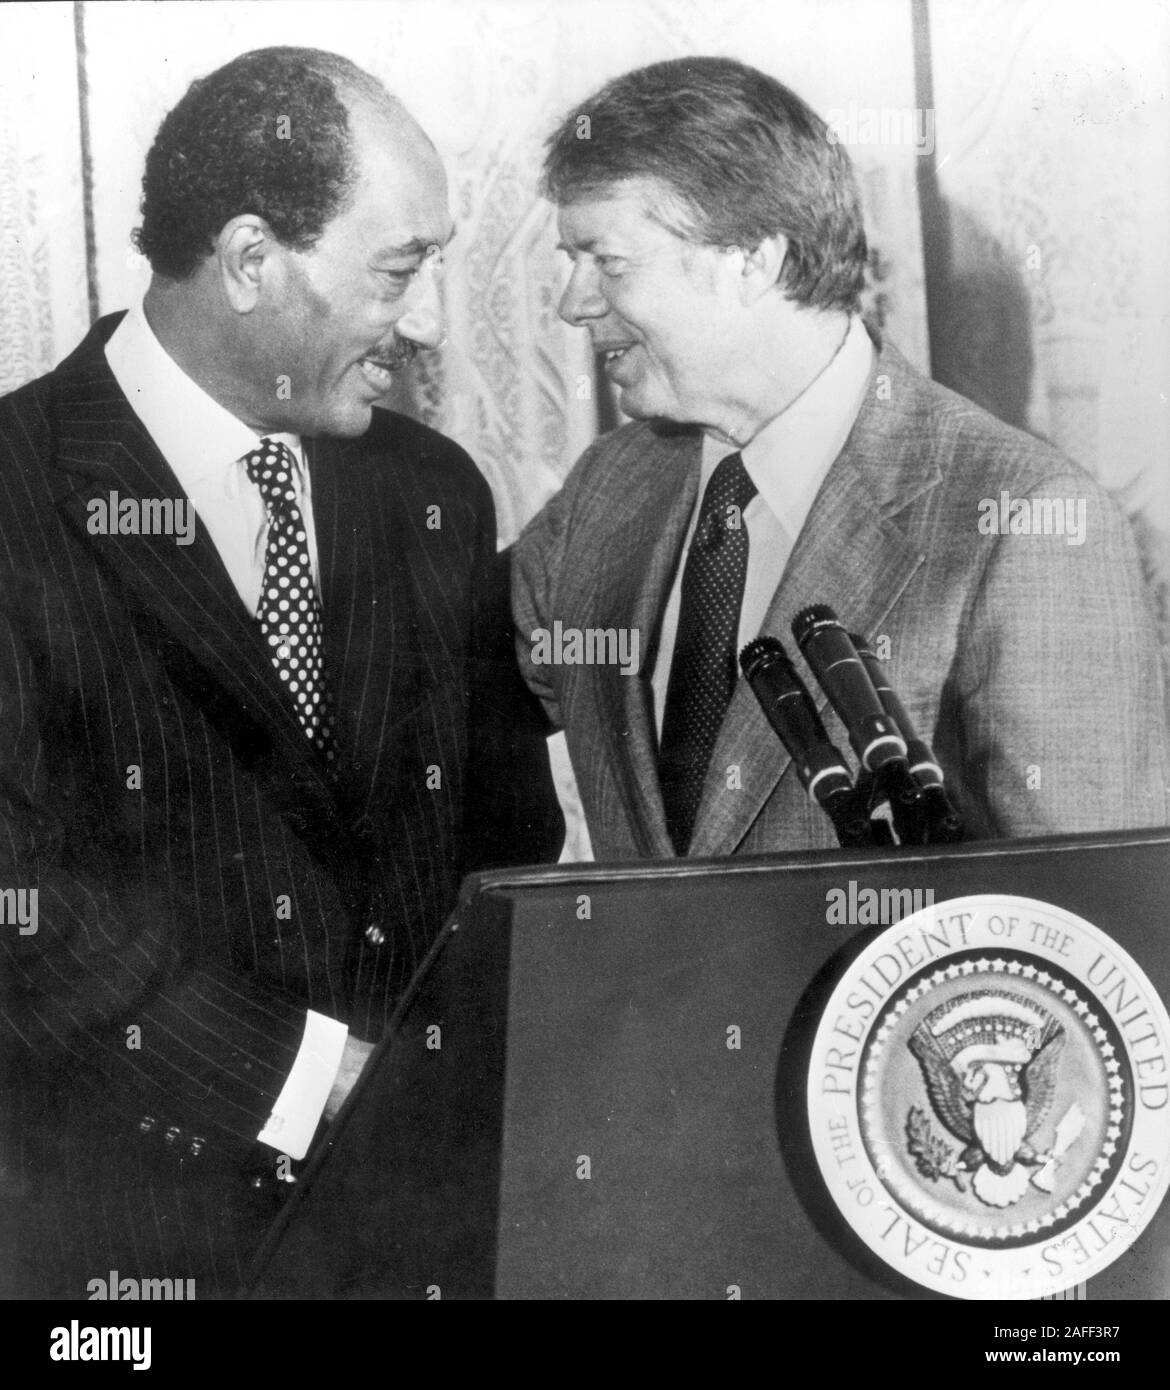 Apr 4, 1977 - Washington, District of Columbia, USA - JIMMY CARTER stands with Egyptian President ANWAR AS SADAT at a podium with the presidential seal. President Sadat is in town to continue peace terms conversation with President Carter.(Credit Image: © Keystone Press Agency/Keystone USA via ZUMAPRESS.com) Stock Photo